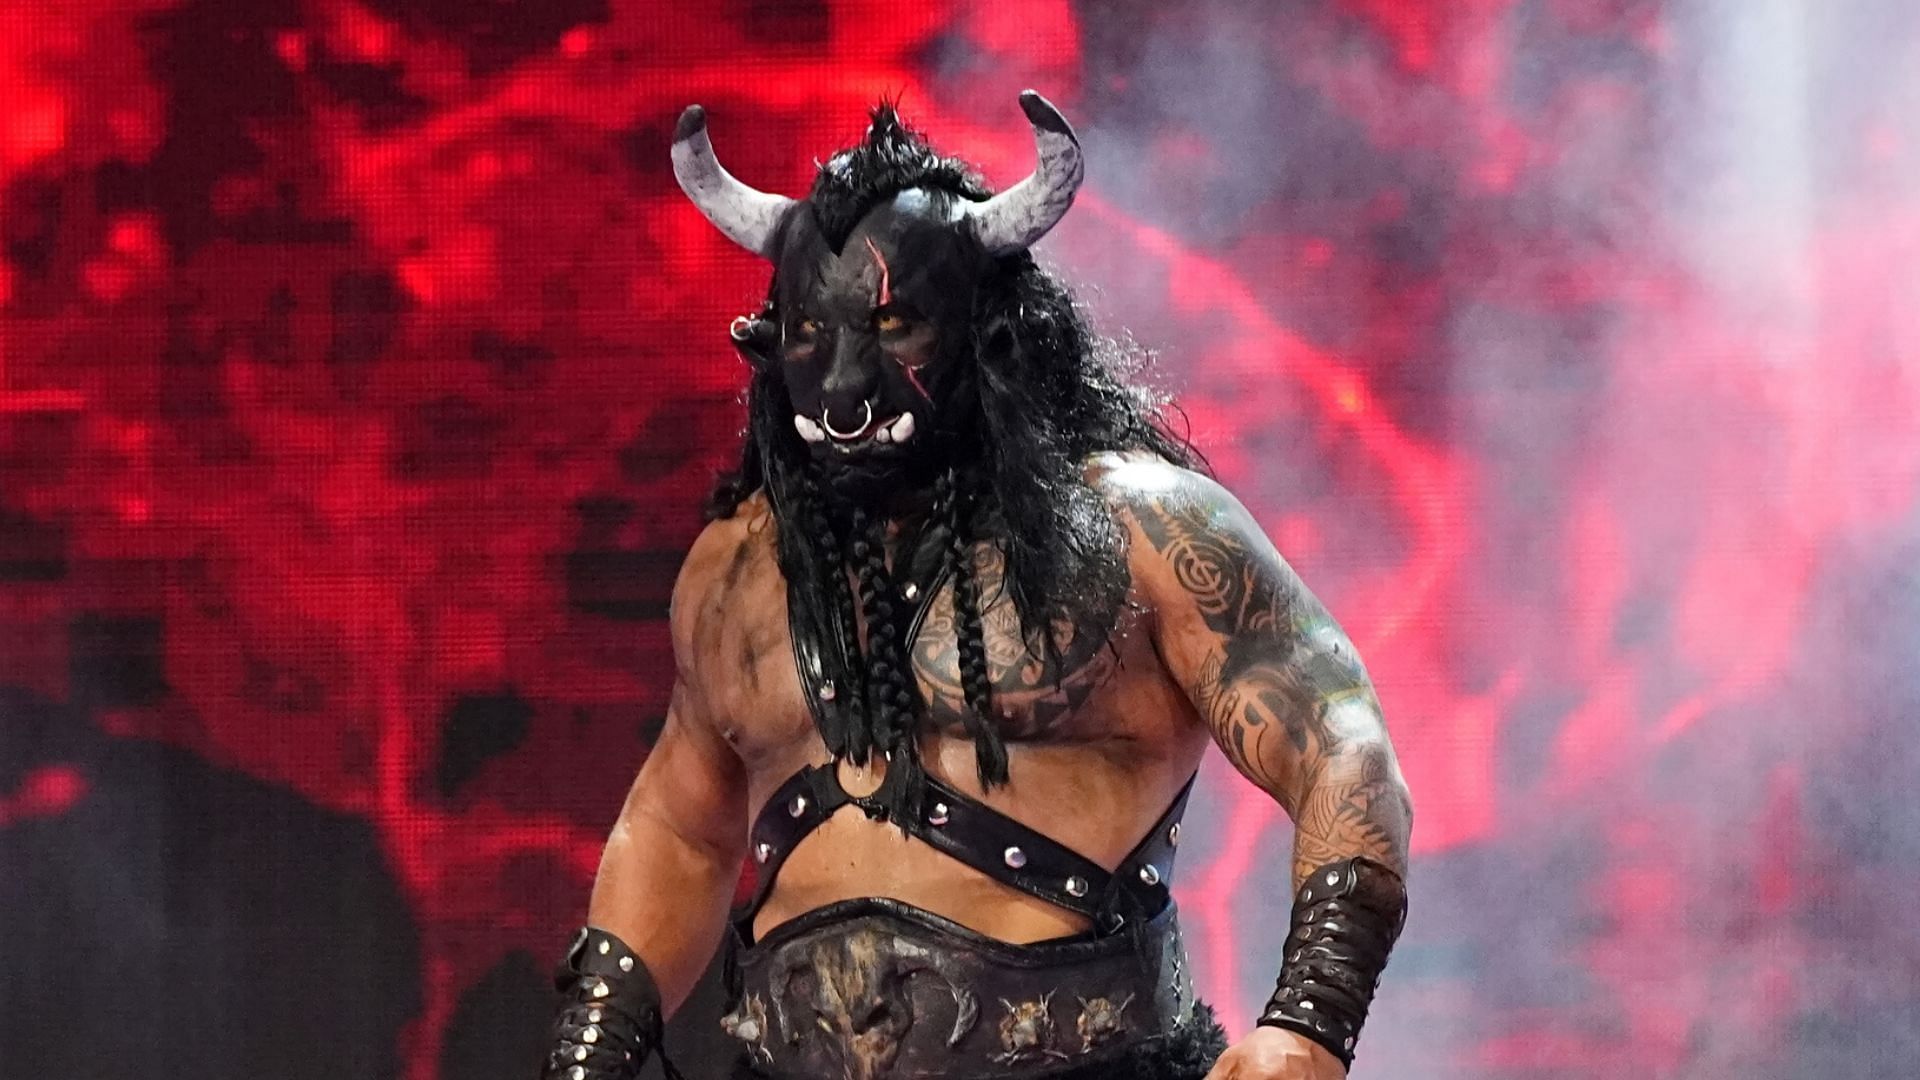 Black Taurus is a luchador who has made sporadic appearances on AEW and ROH [Photo courtesy of AEW